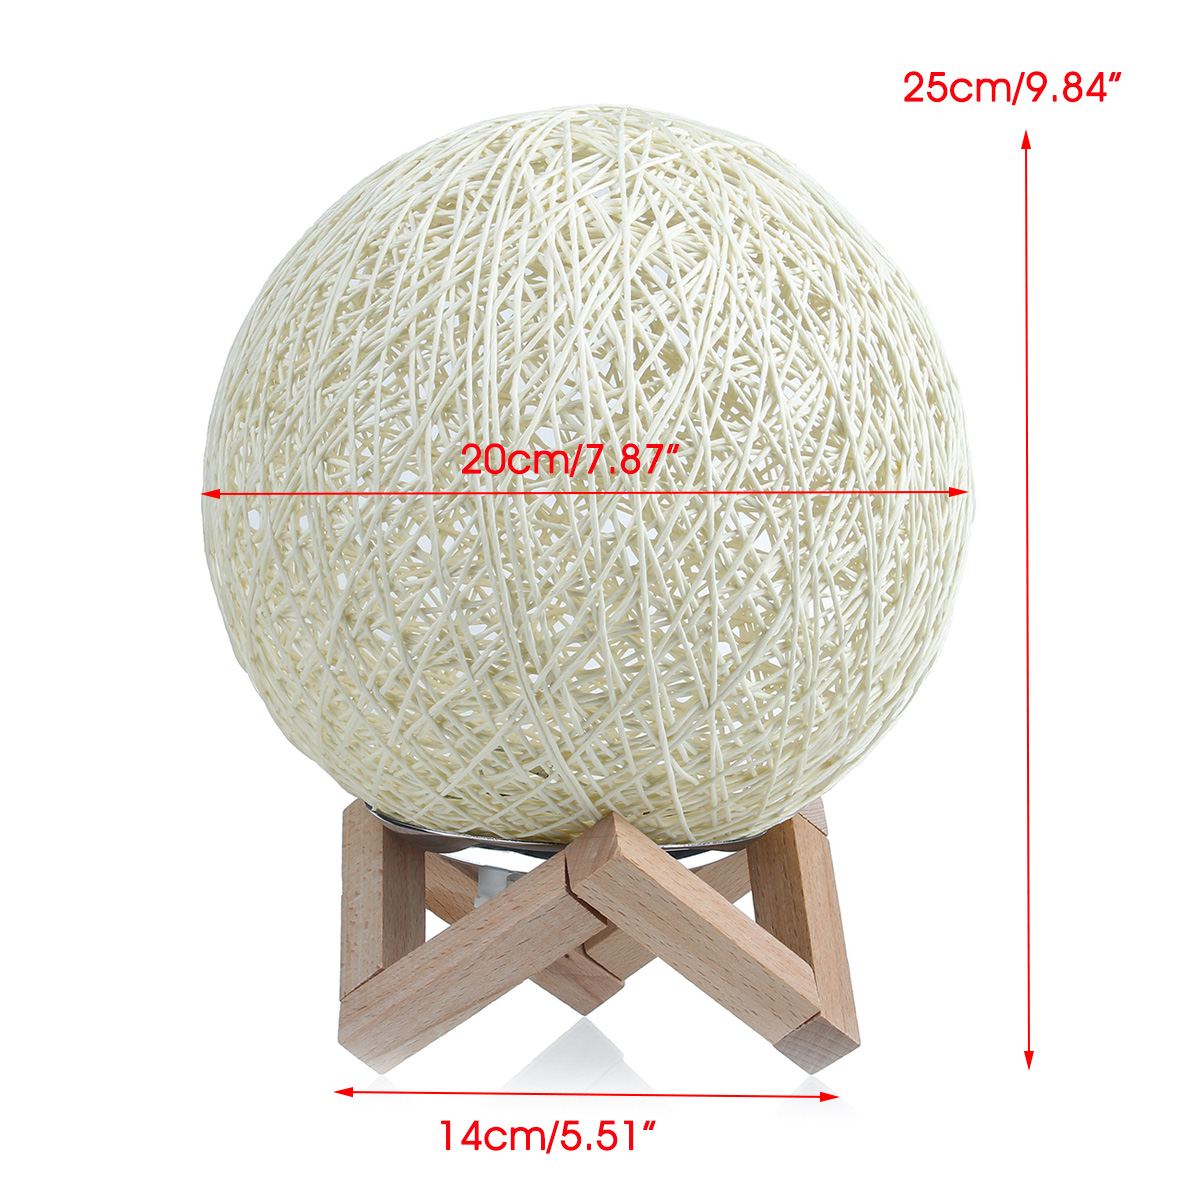 USB-Wooden-Rattan-Table-Light-Dimming-Desk-Bedroom-Night-LED-Ball-Home-Decorations-1627078-5